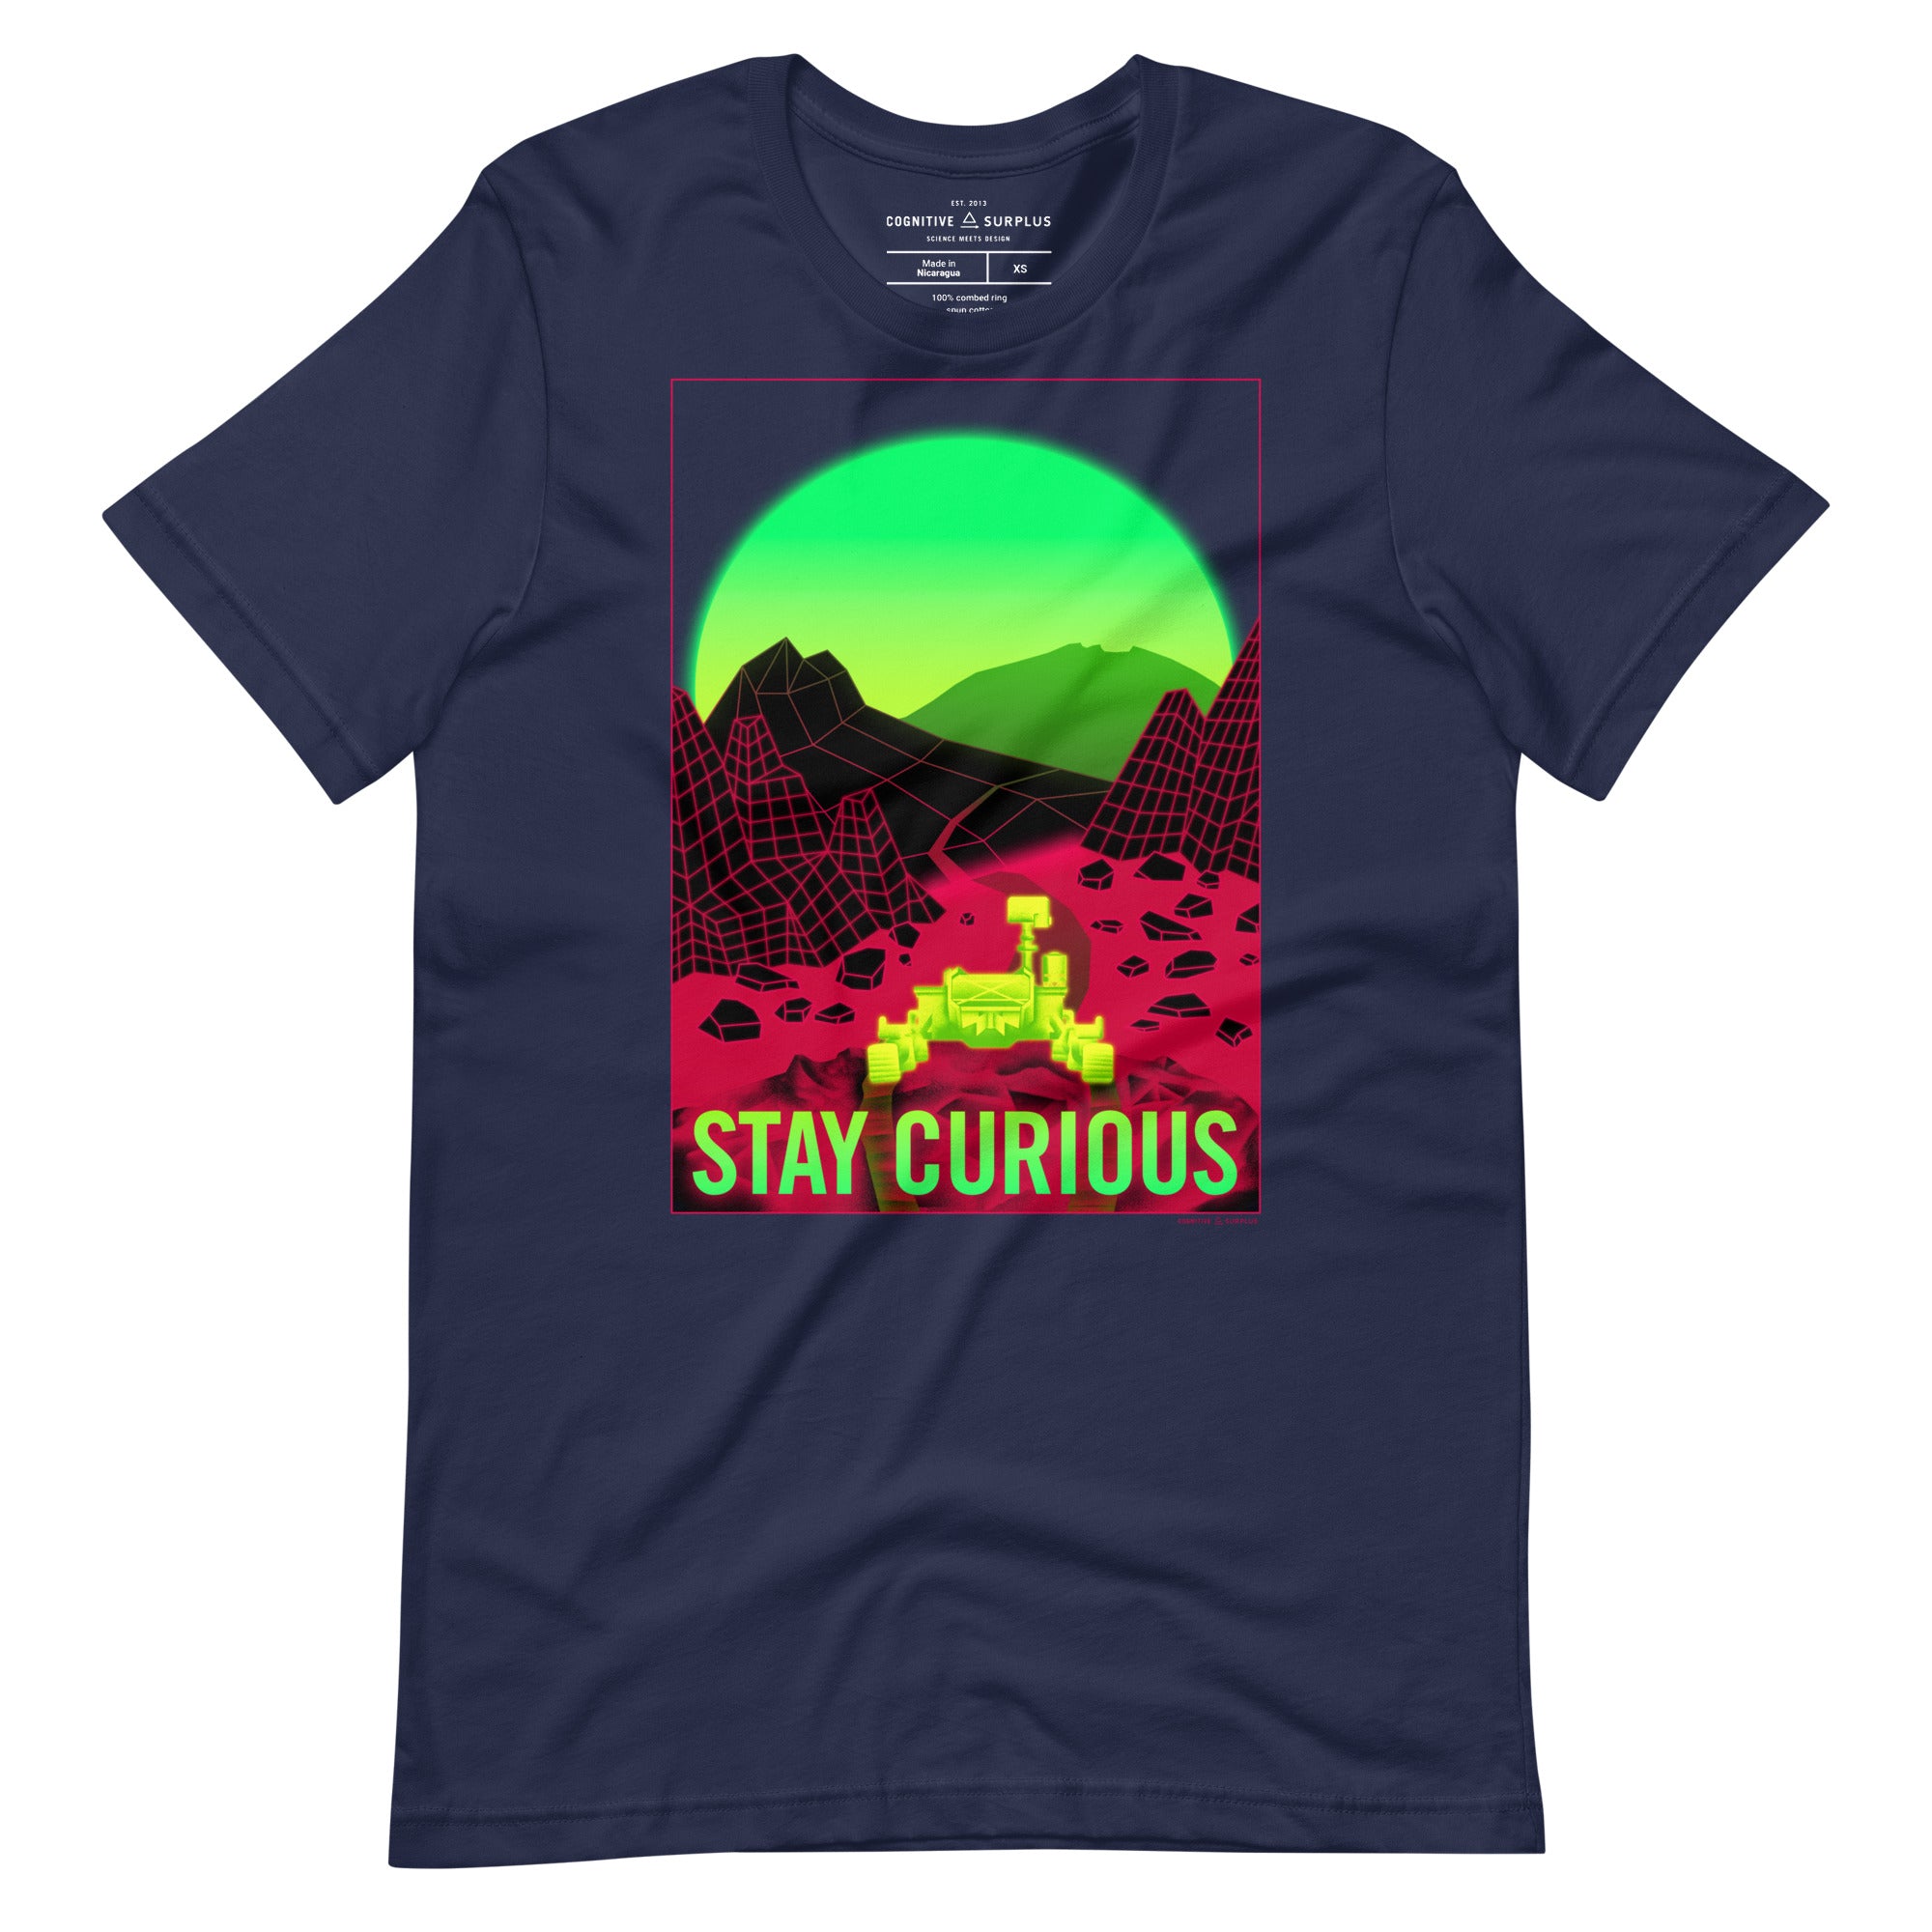 Stay Curious - Vaporwave Mars Rover Graphic Tee